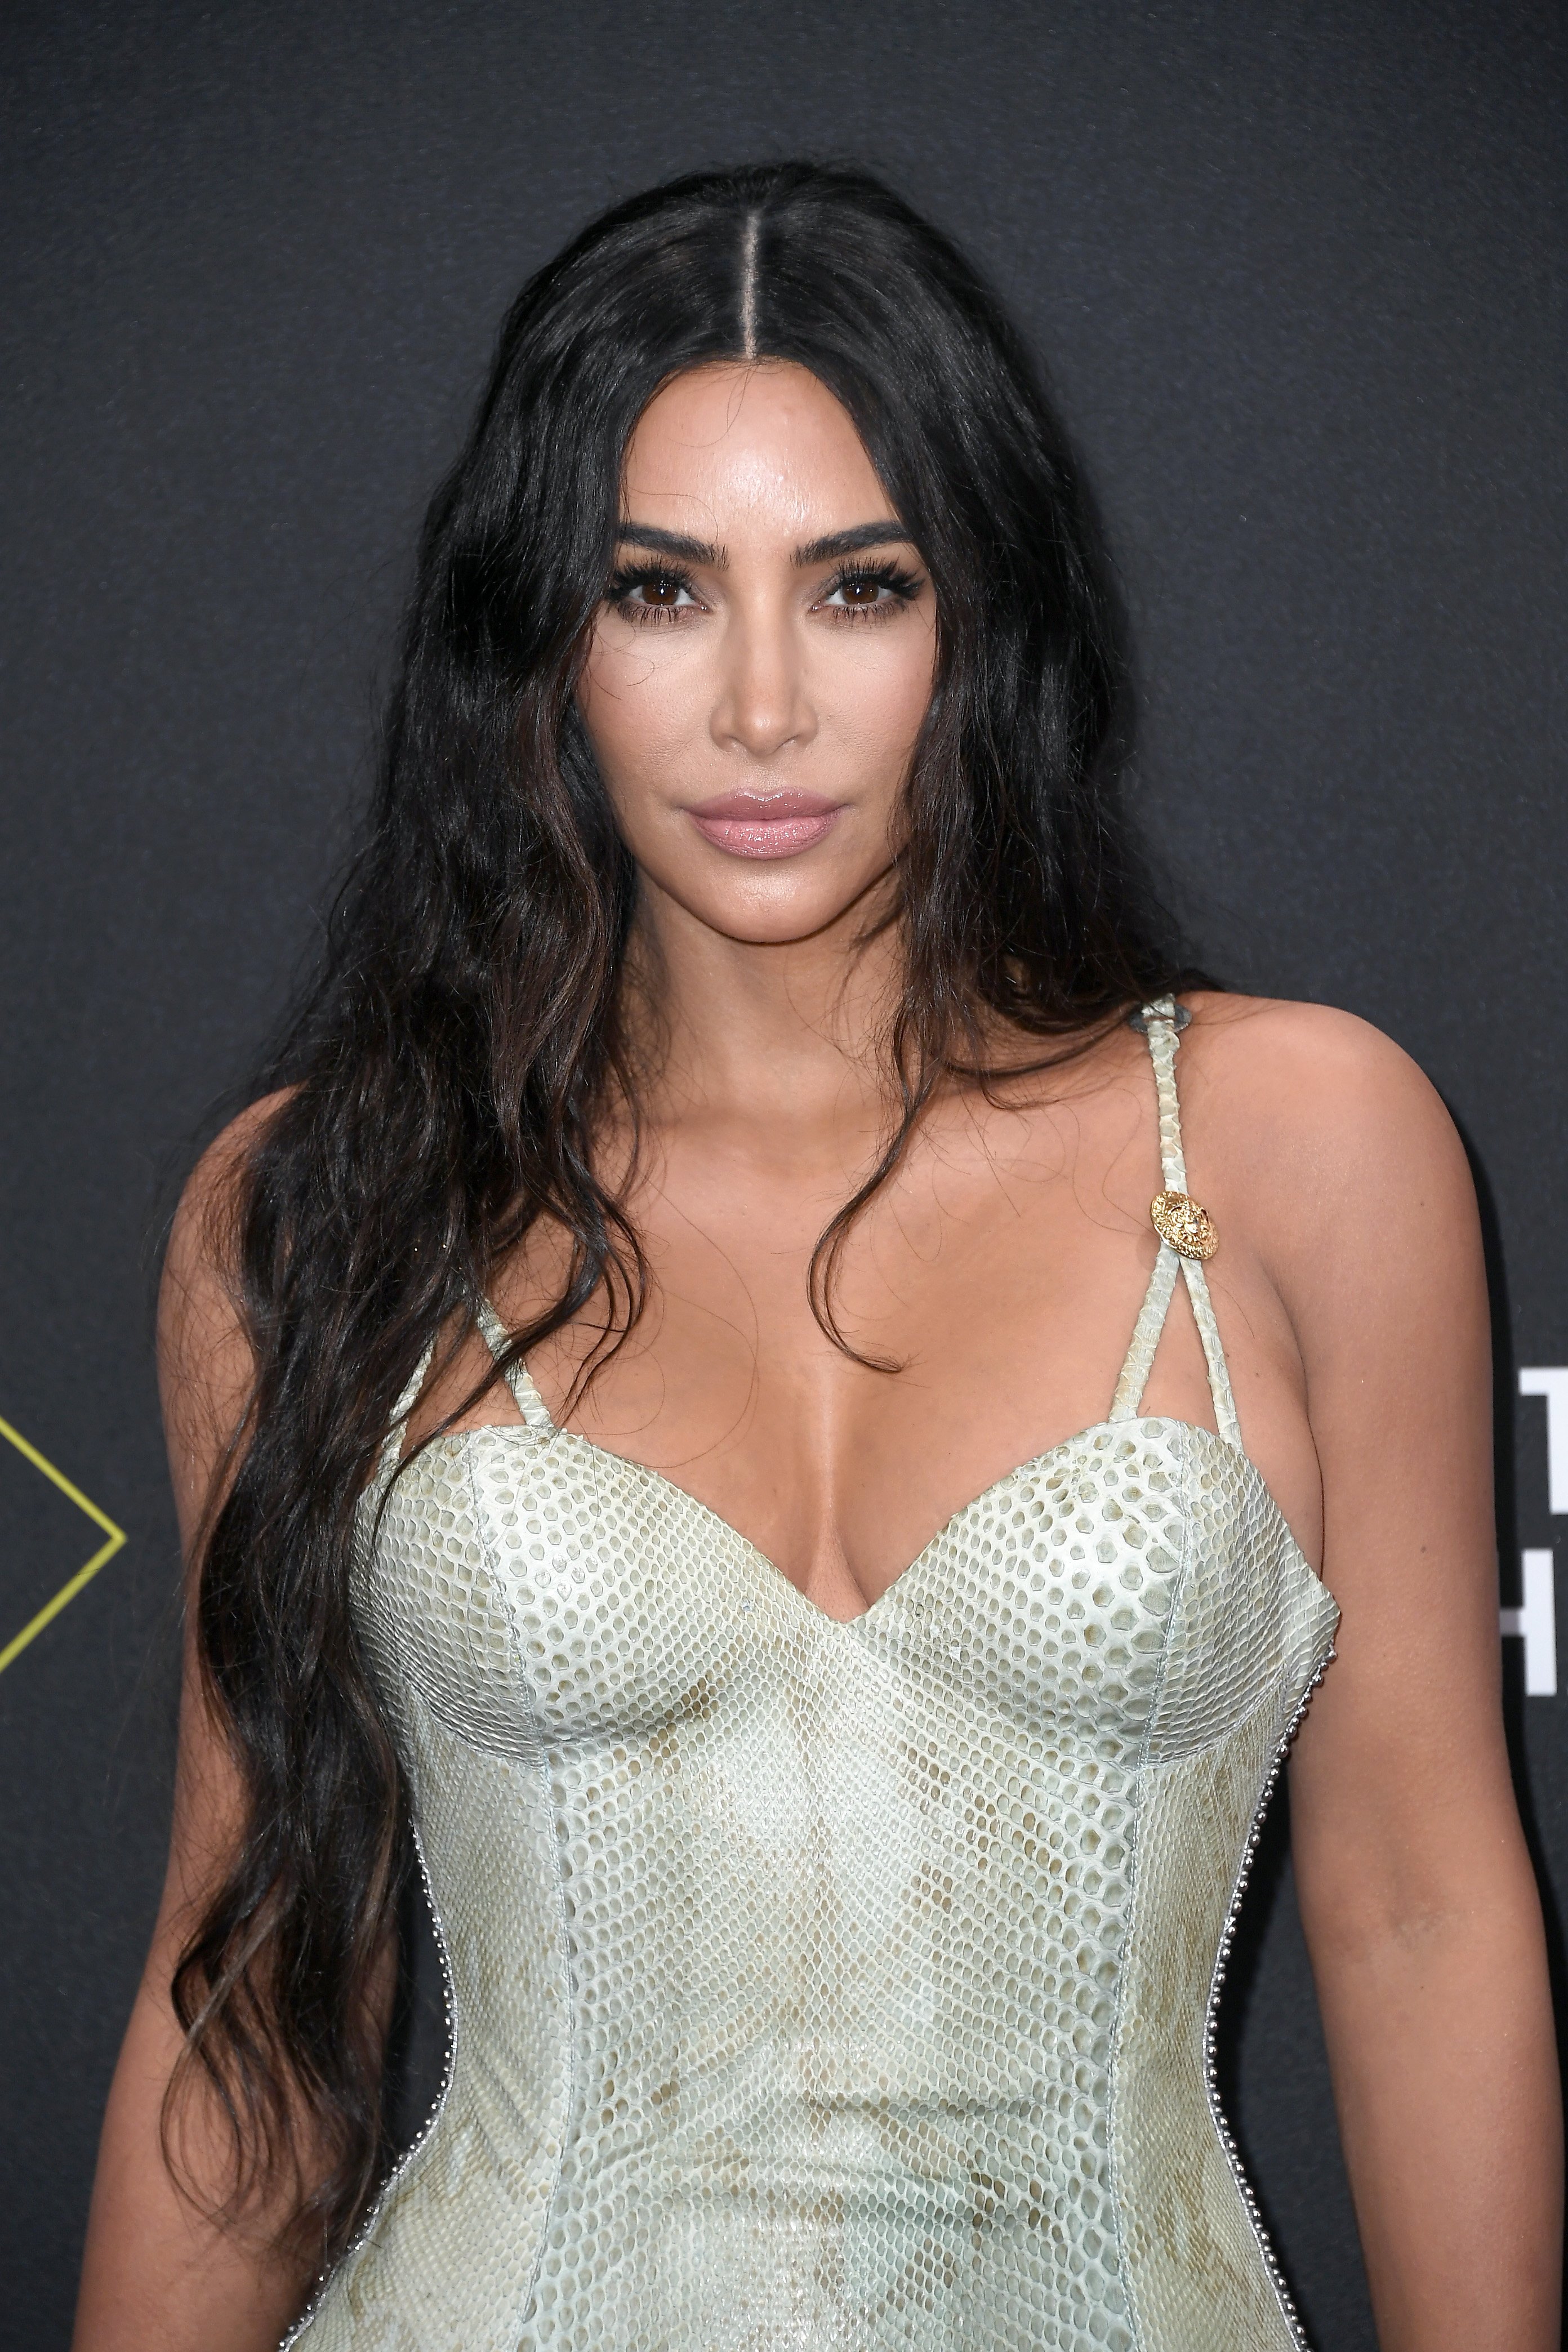  Kim Kardashian at the 2019 E! People's Choice Awards | Source: Getty Images